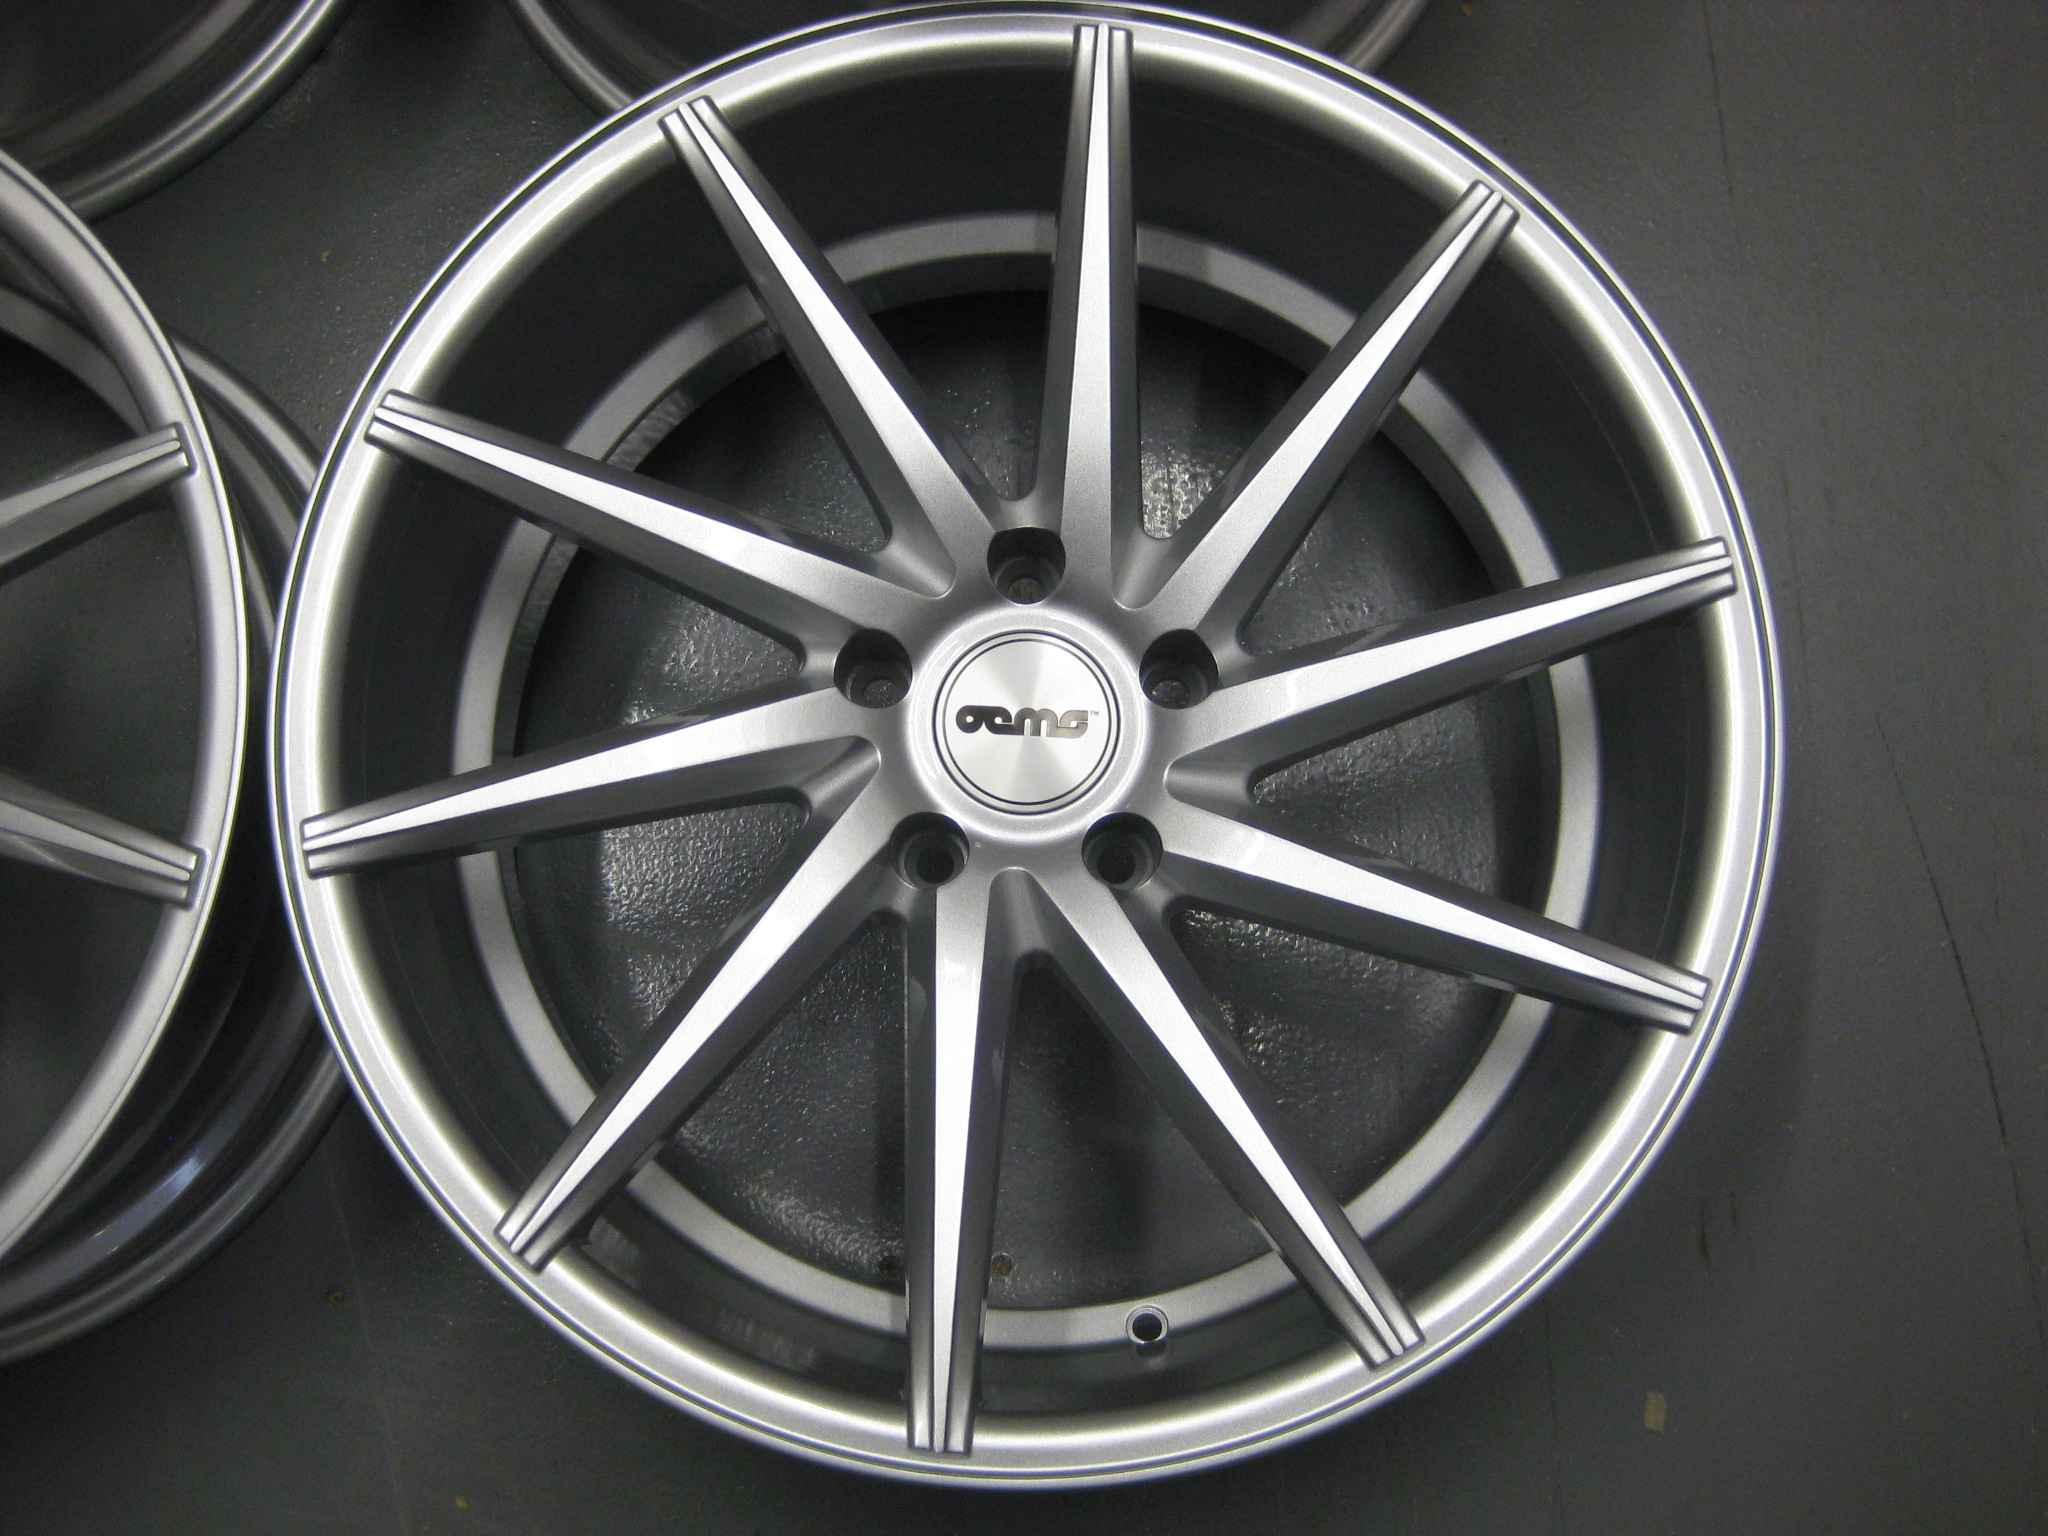 NEW 20" OEMS CVT DIRECTIONAL ALLOY WHEELS IN SILVER, WIDER 10.5" REAR